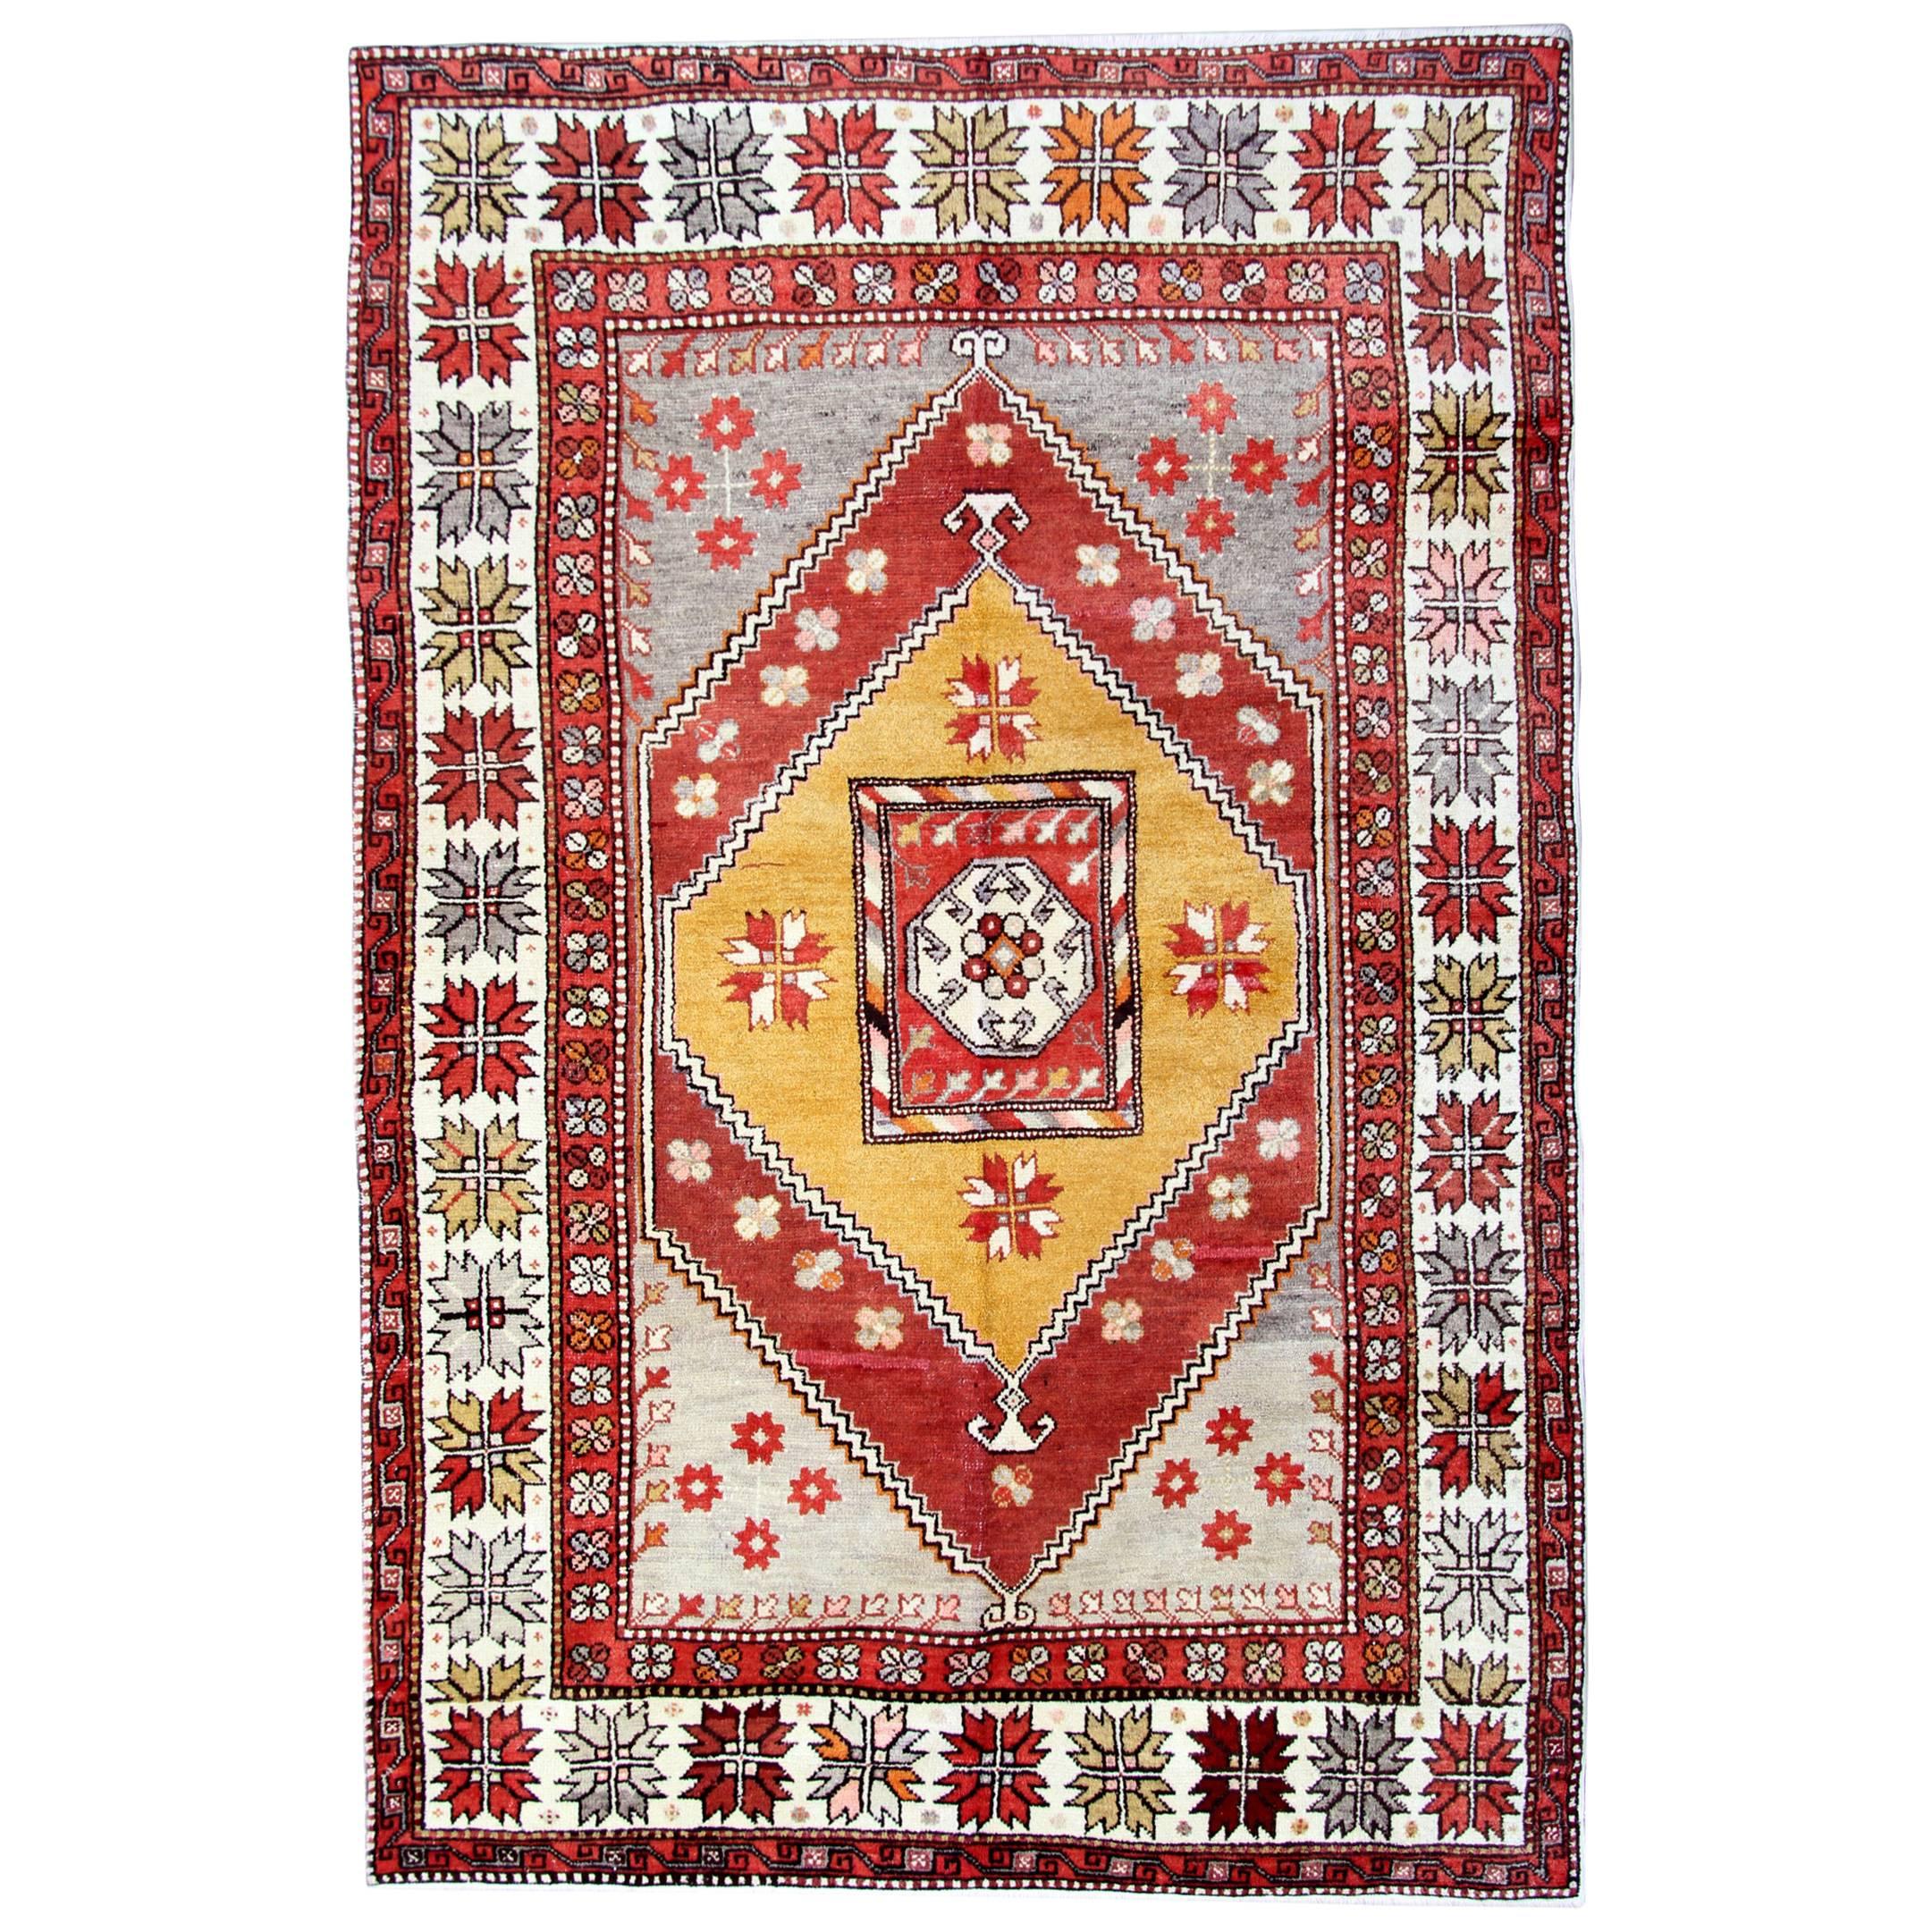 Milas Antique Rugs, Turkish Rug Yellow Handmade Carpet Oriental Rugs for Sale For Sale